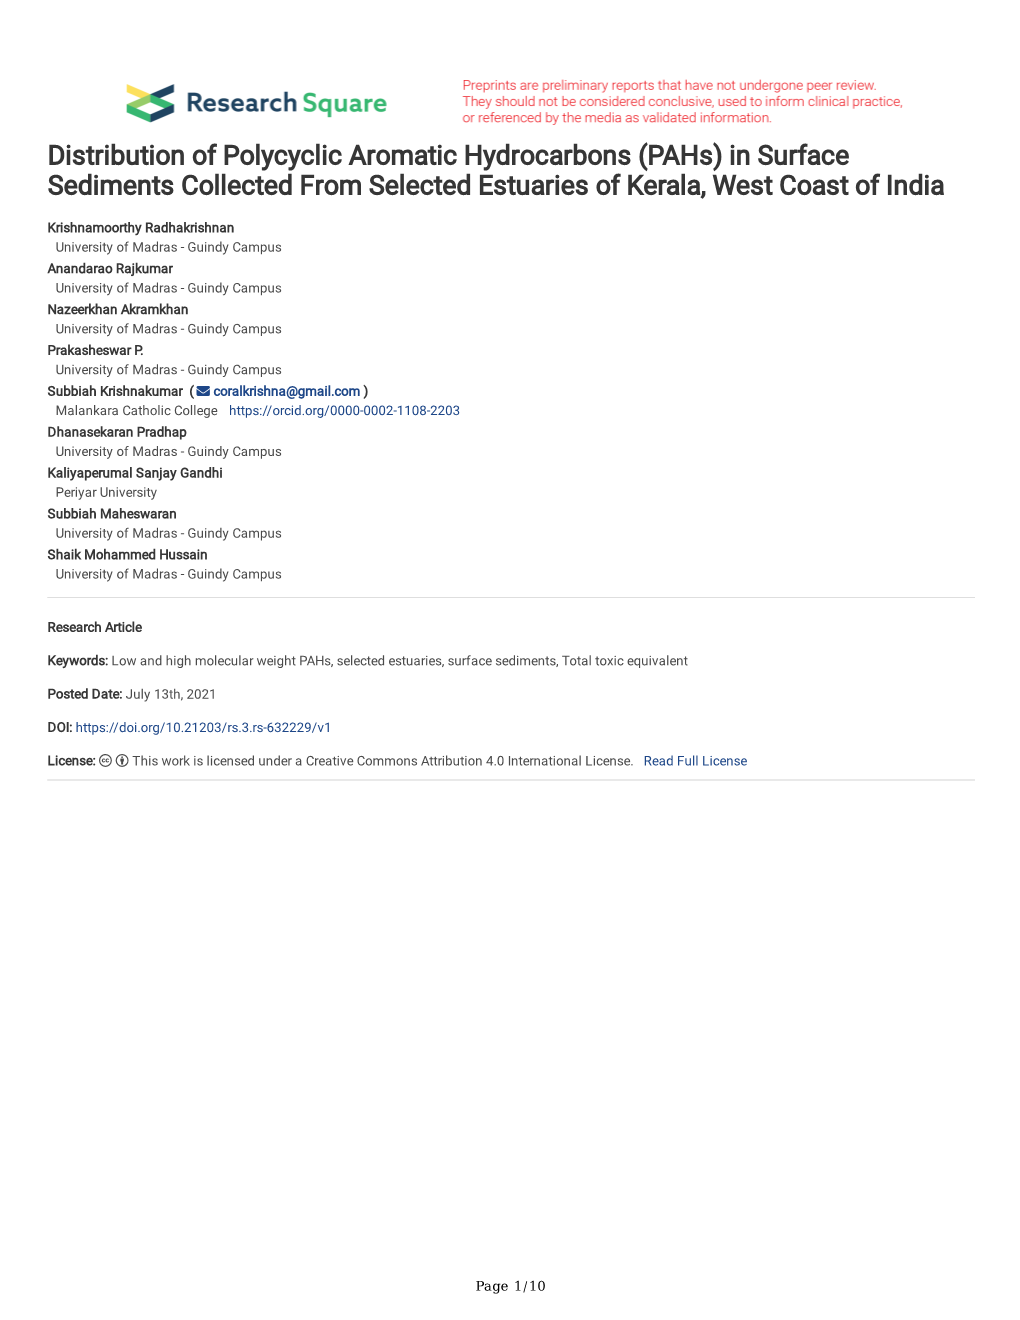 Distribution of Polycyclic Aromatic Hydrocarbons (Pahs) in Surface Sediments Collected from Selected Estuaries of Kerala, West Coast of India